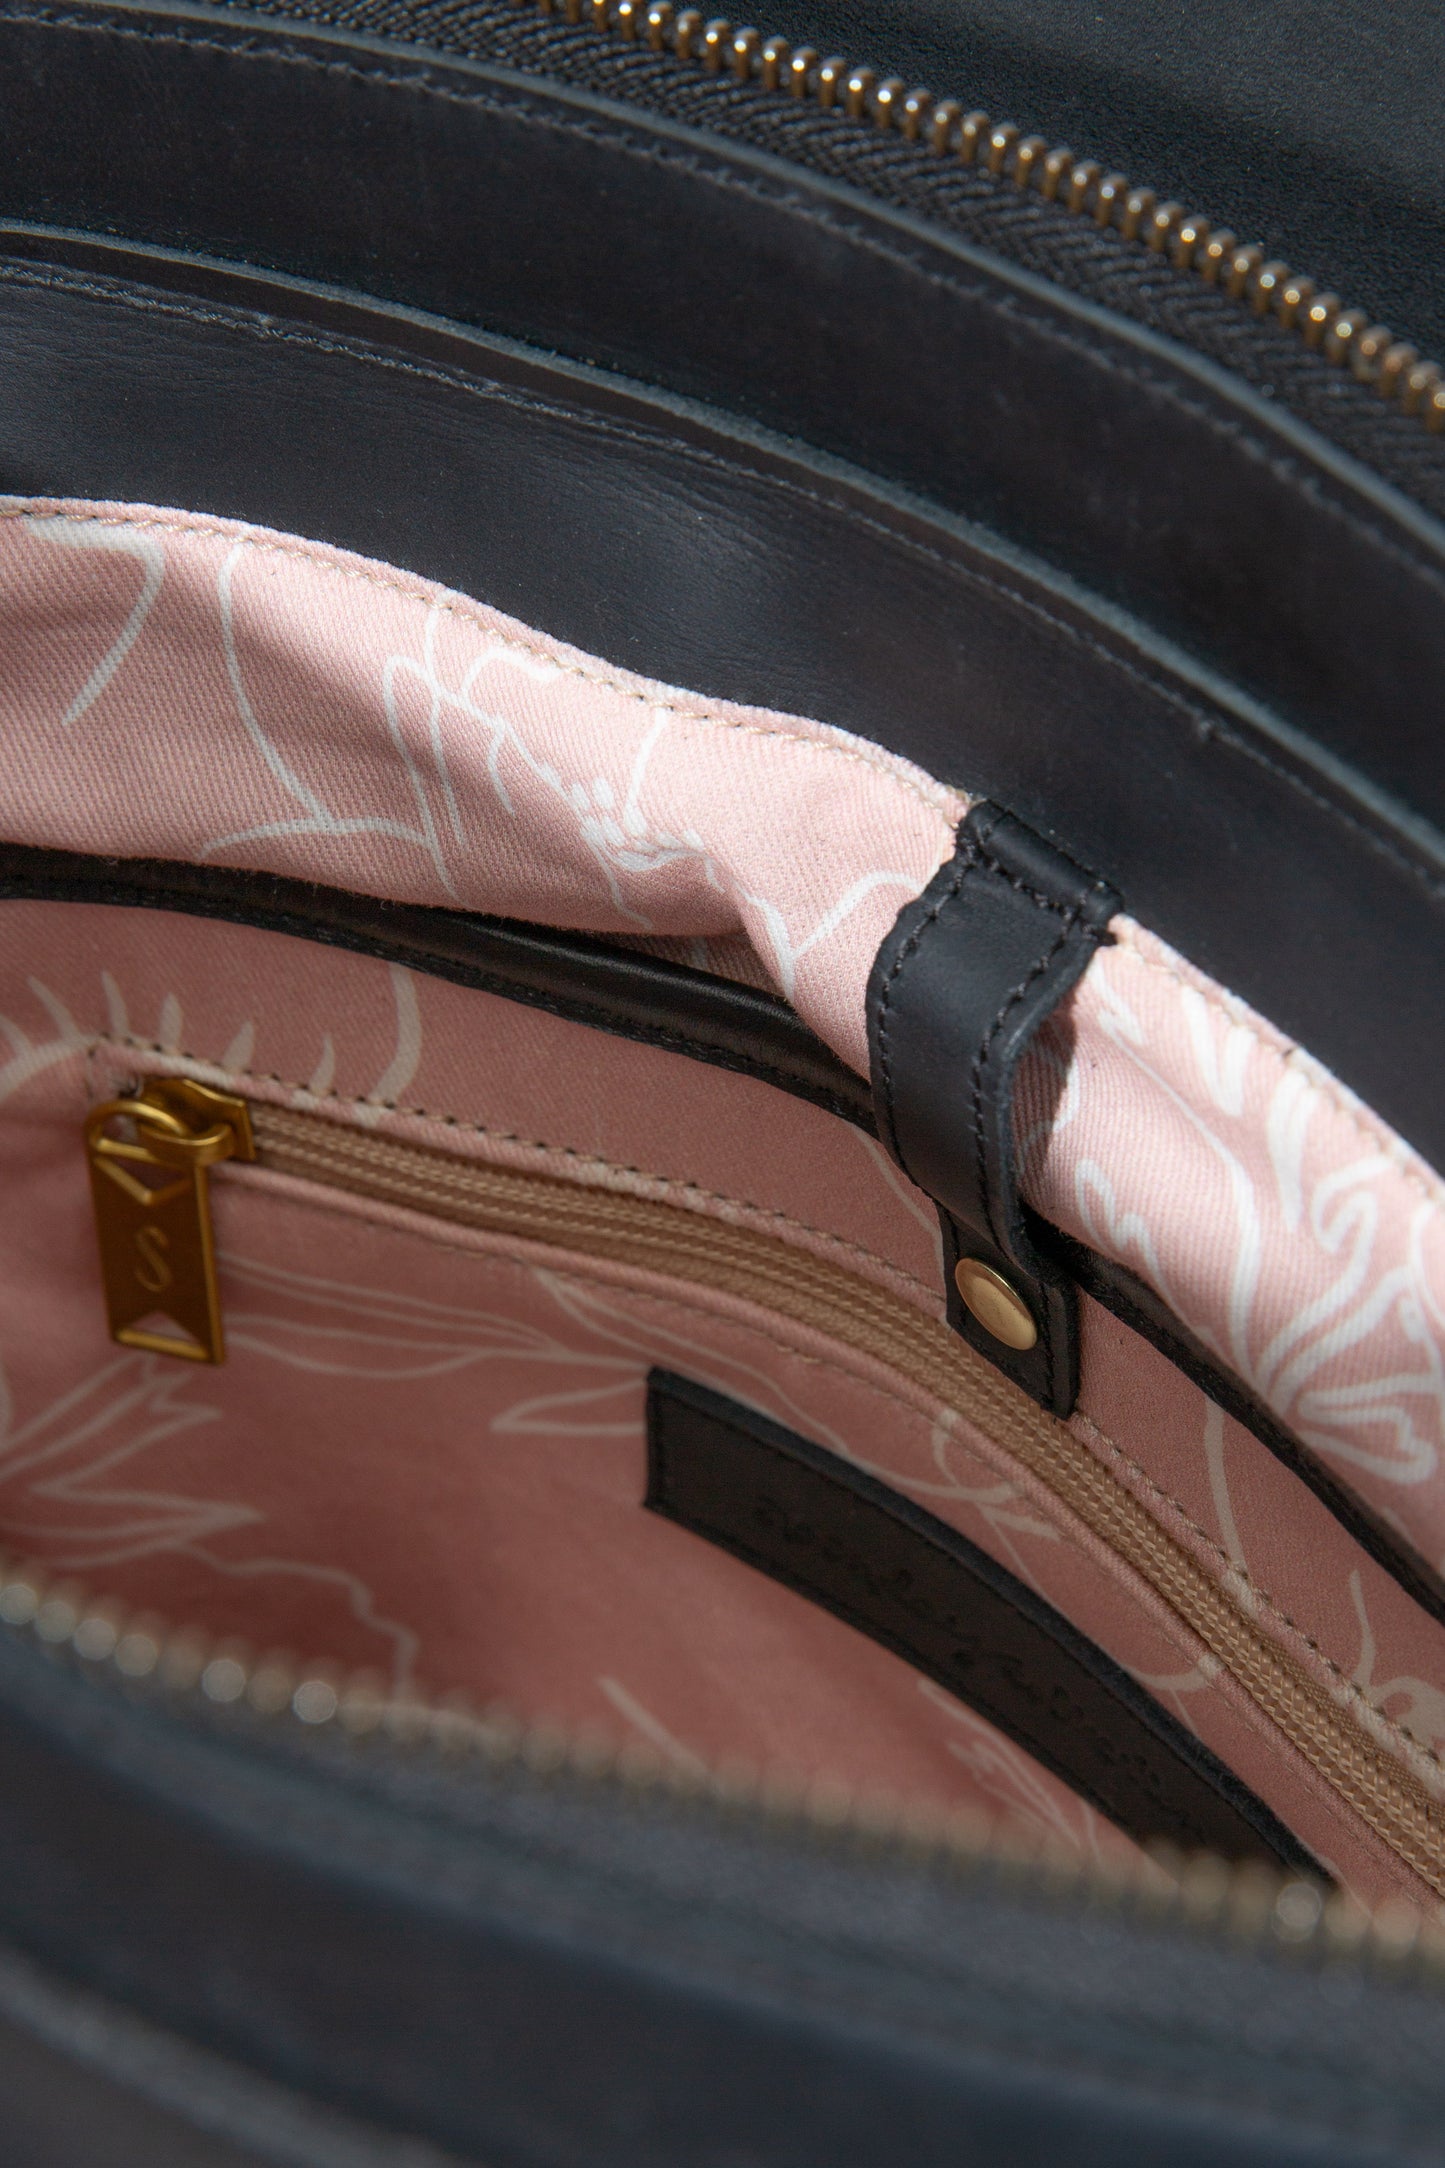 The interior front wall of the Debut Backpack is shown. There are two fabric pockets stitched into the wall of the bag.